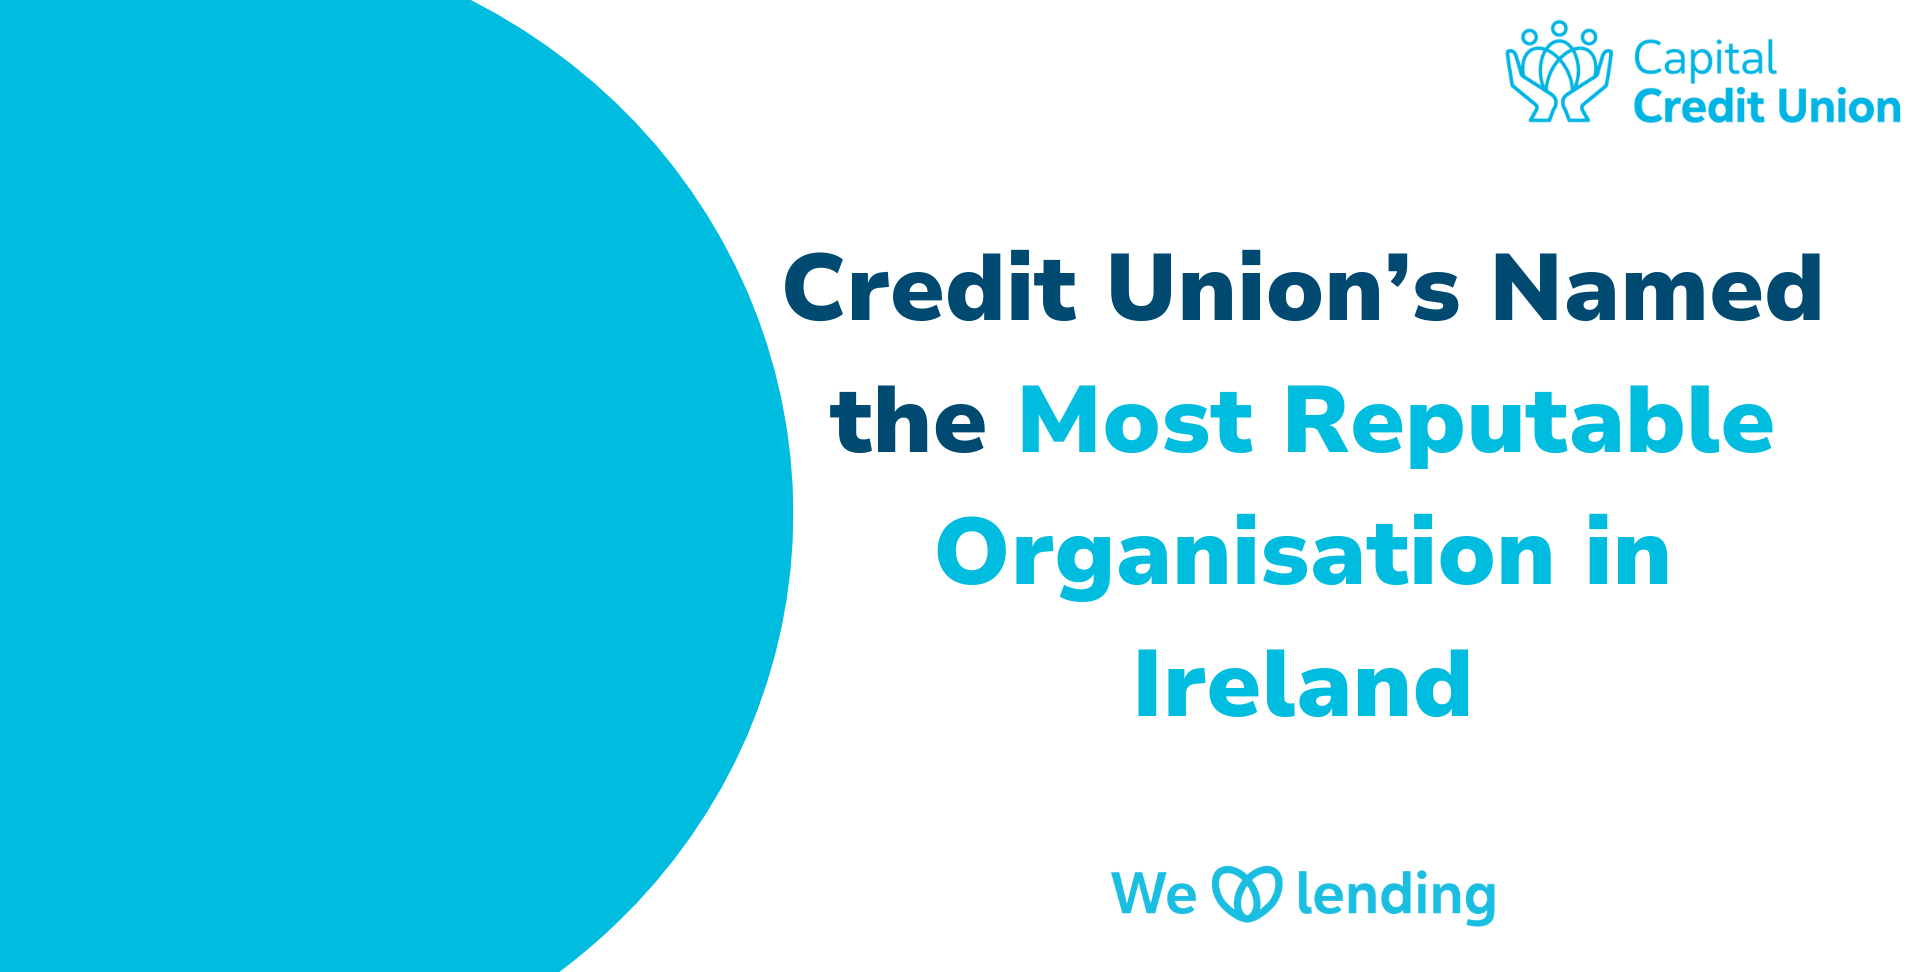 Credit Union’s Named the Most Reputable Organisations in Ireland